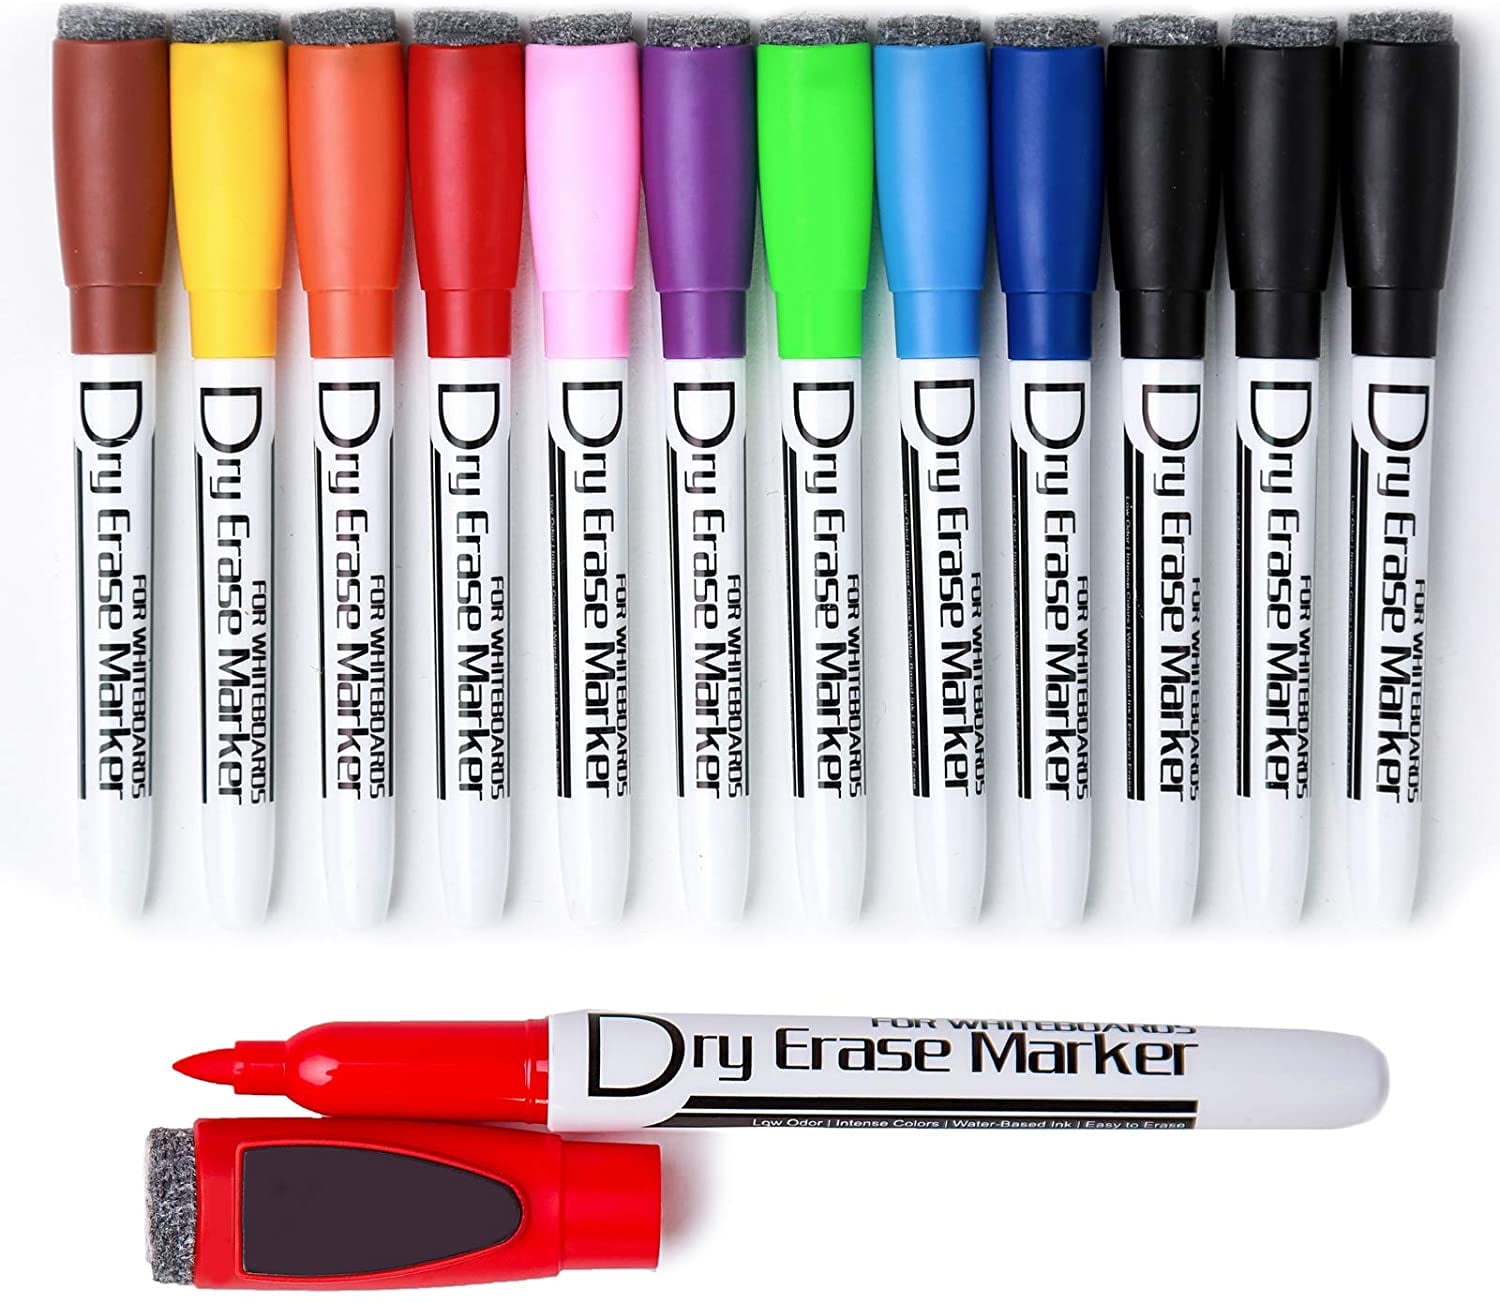 What are some good non-toxic alternatives to dry erase markers that  actually work well on an office whiteboard (not made from glass)? Are there  any ones that are both erasable and reusable? 